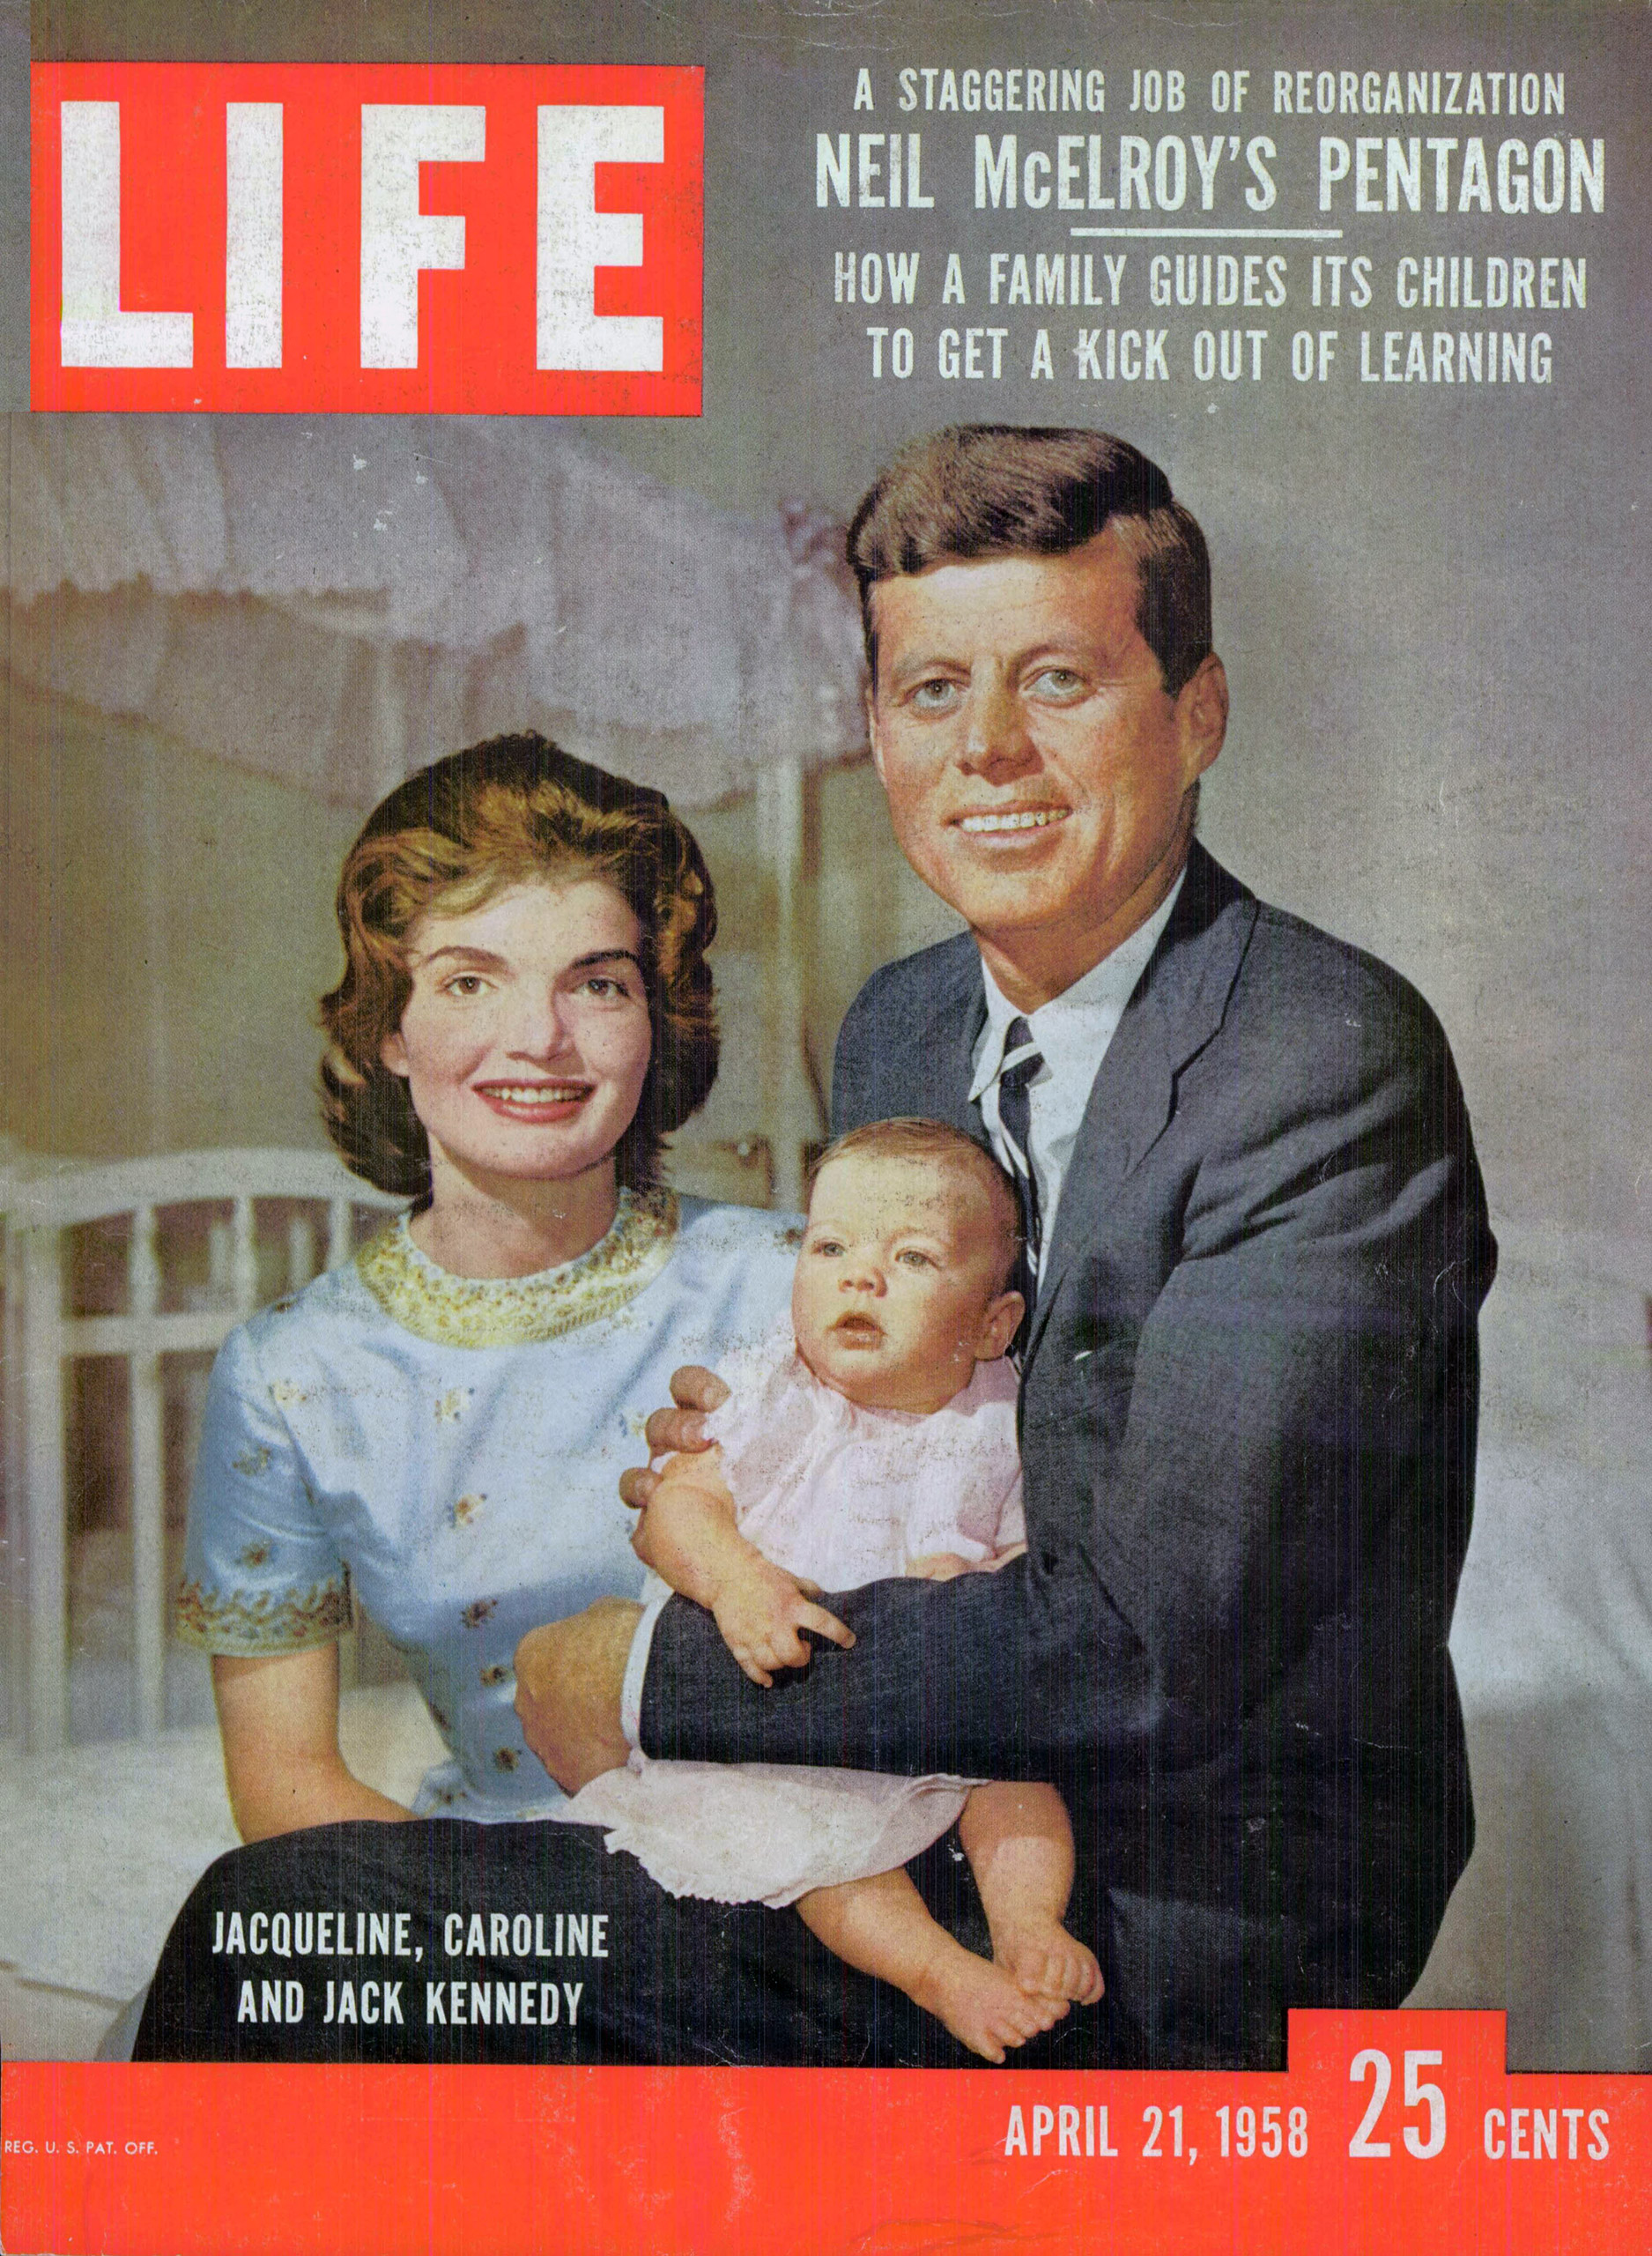 Apr. 21, 1958 cover of LIFE magazine. Cover photo by Nina Leen.